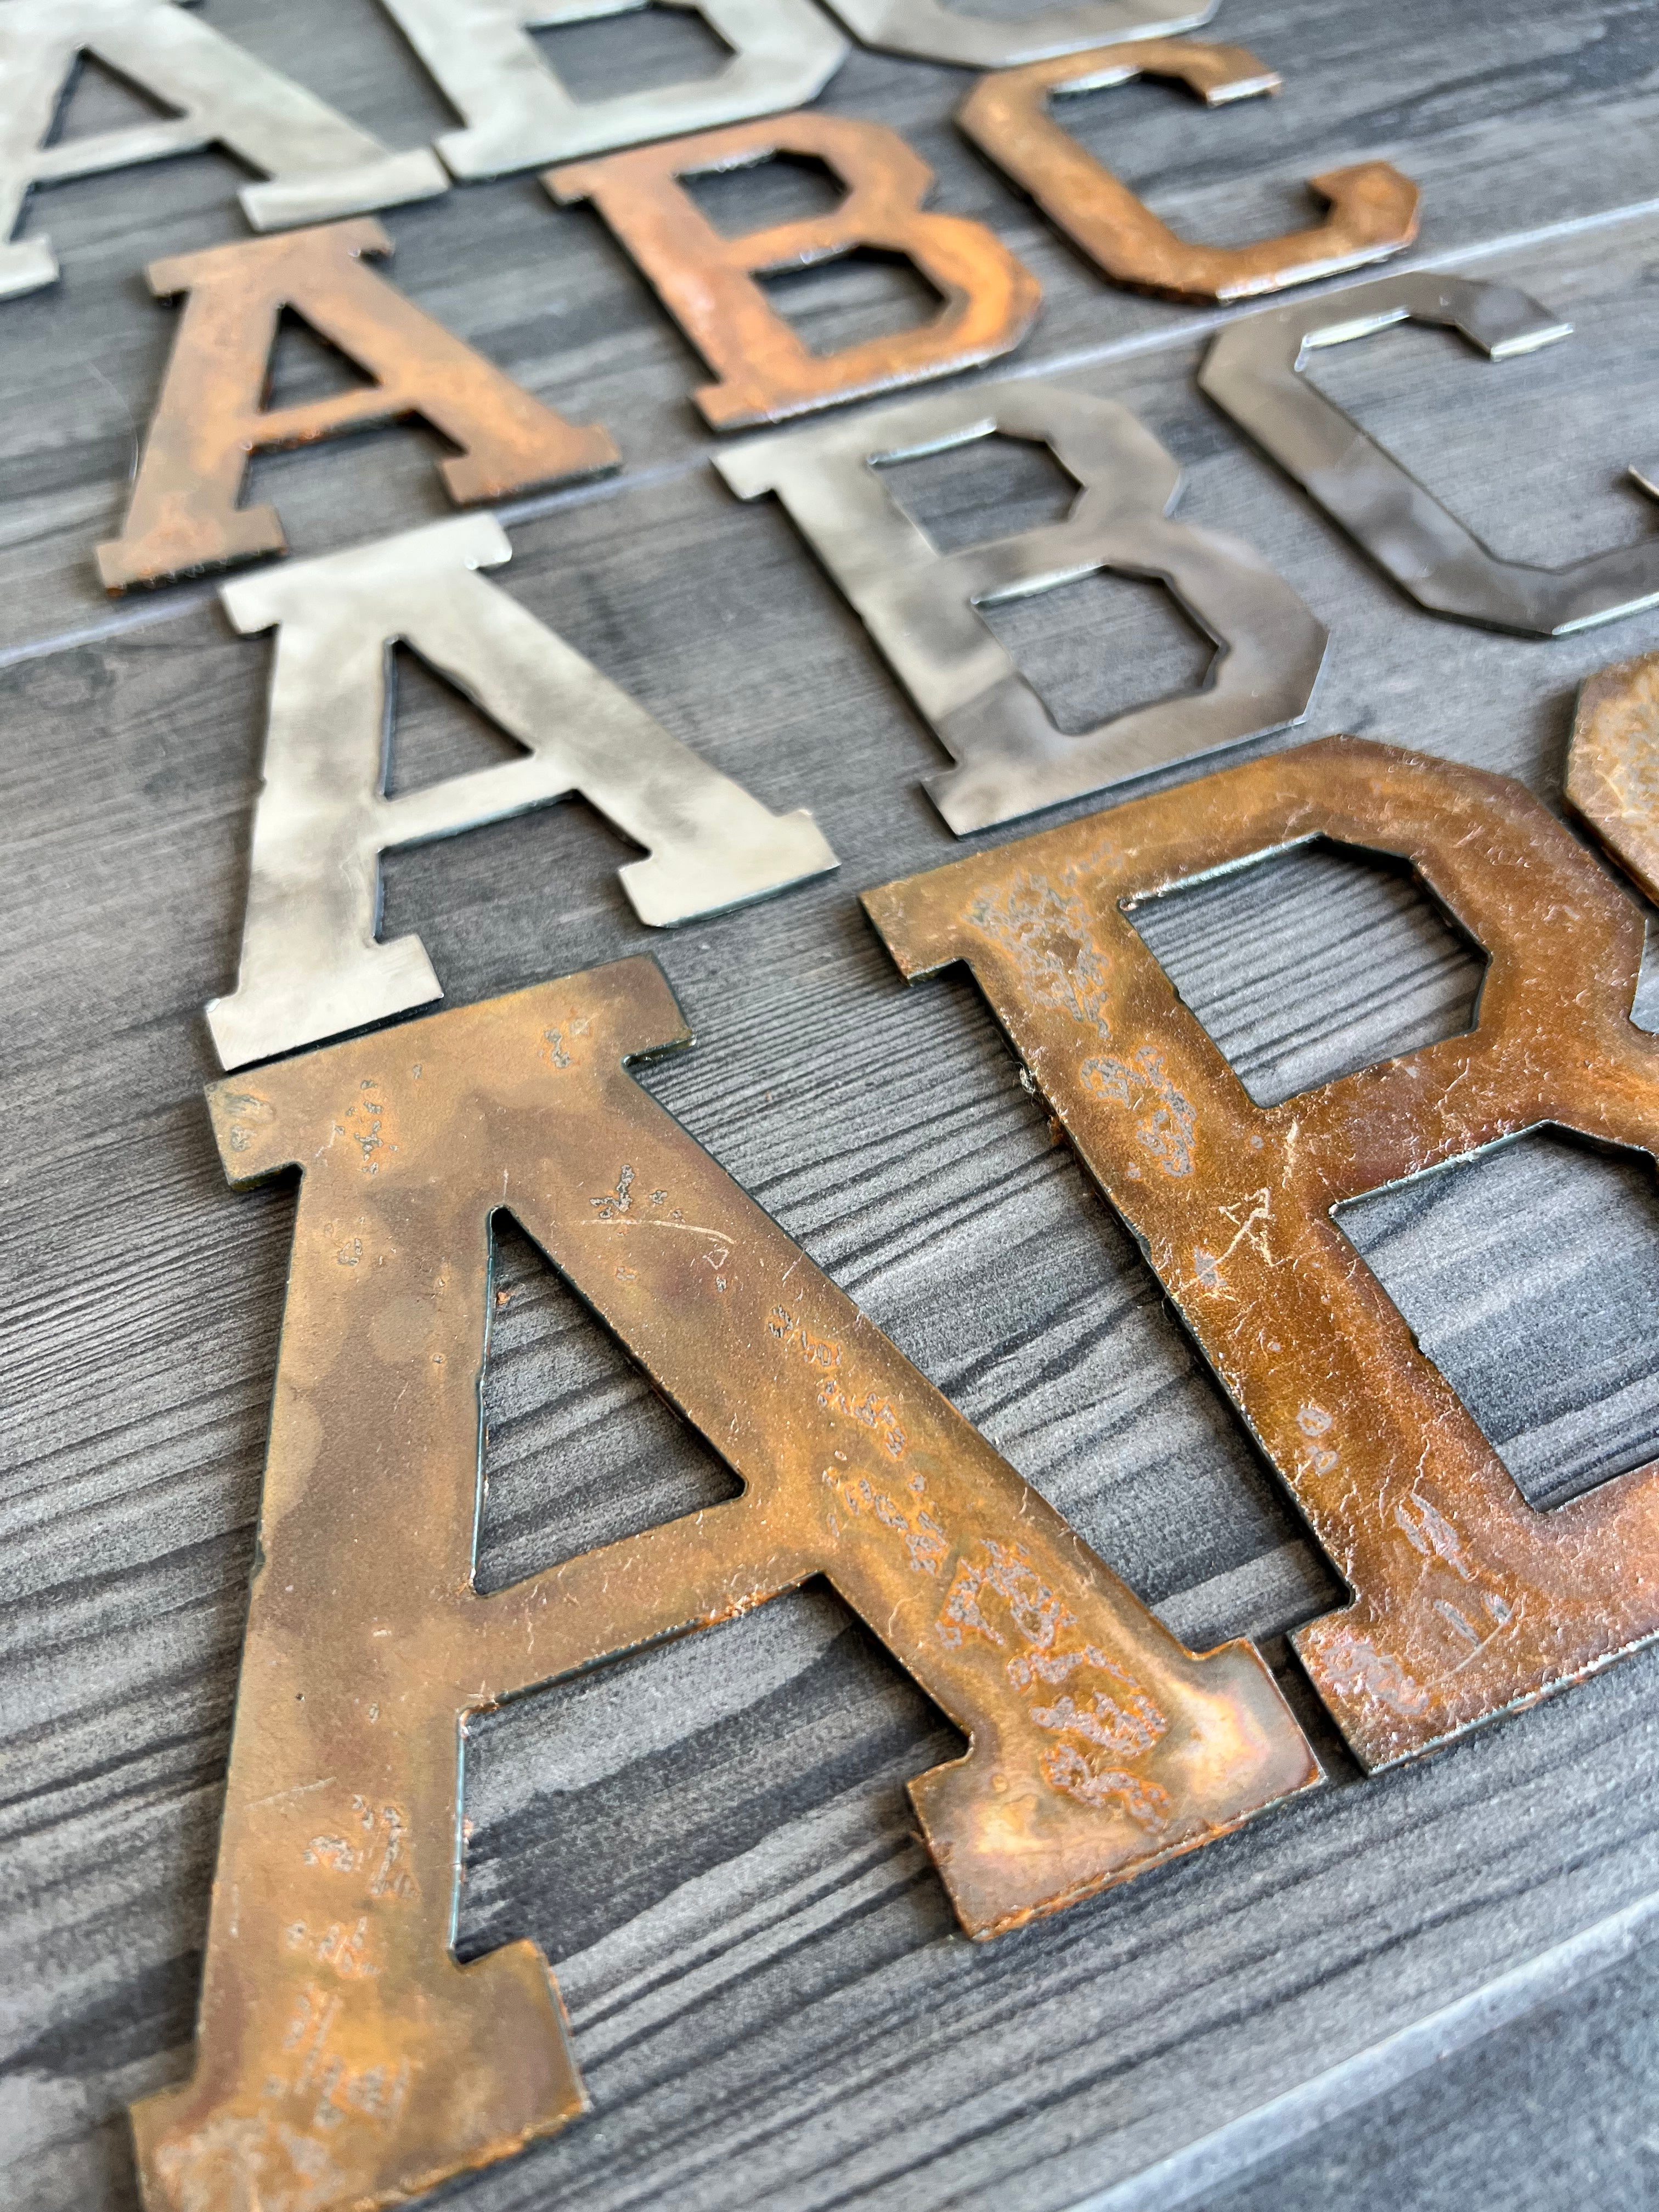 10 Inch Metal Letters and Numbers - Rusty or Natural Steel Finish - Va